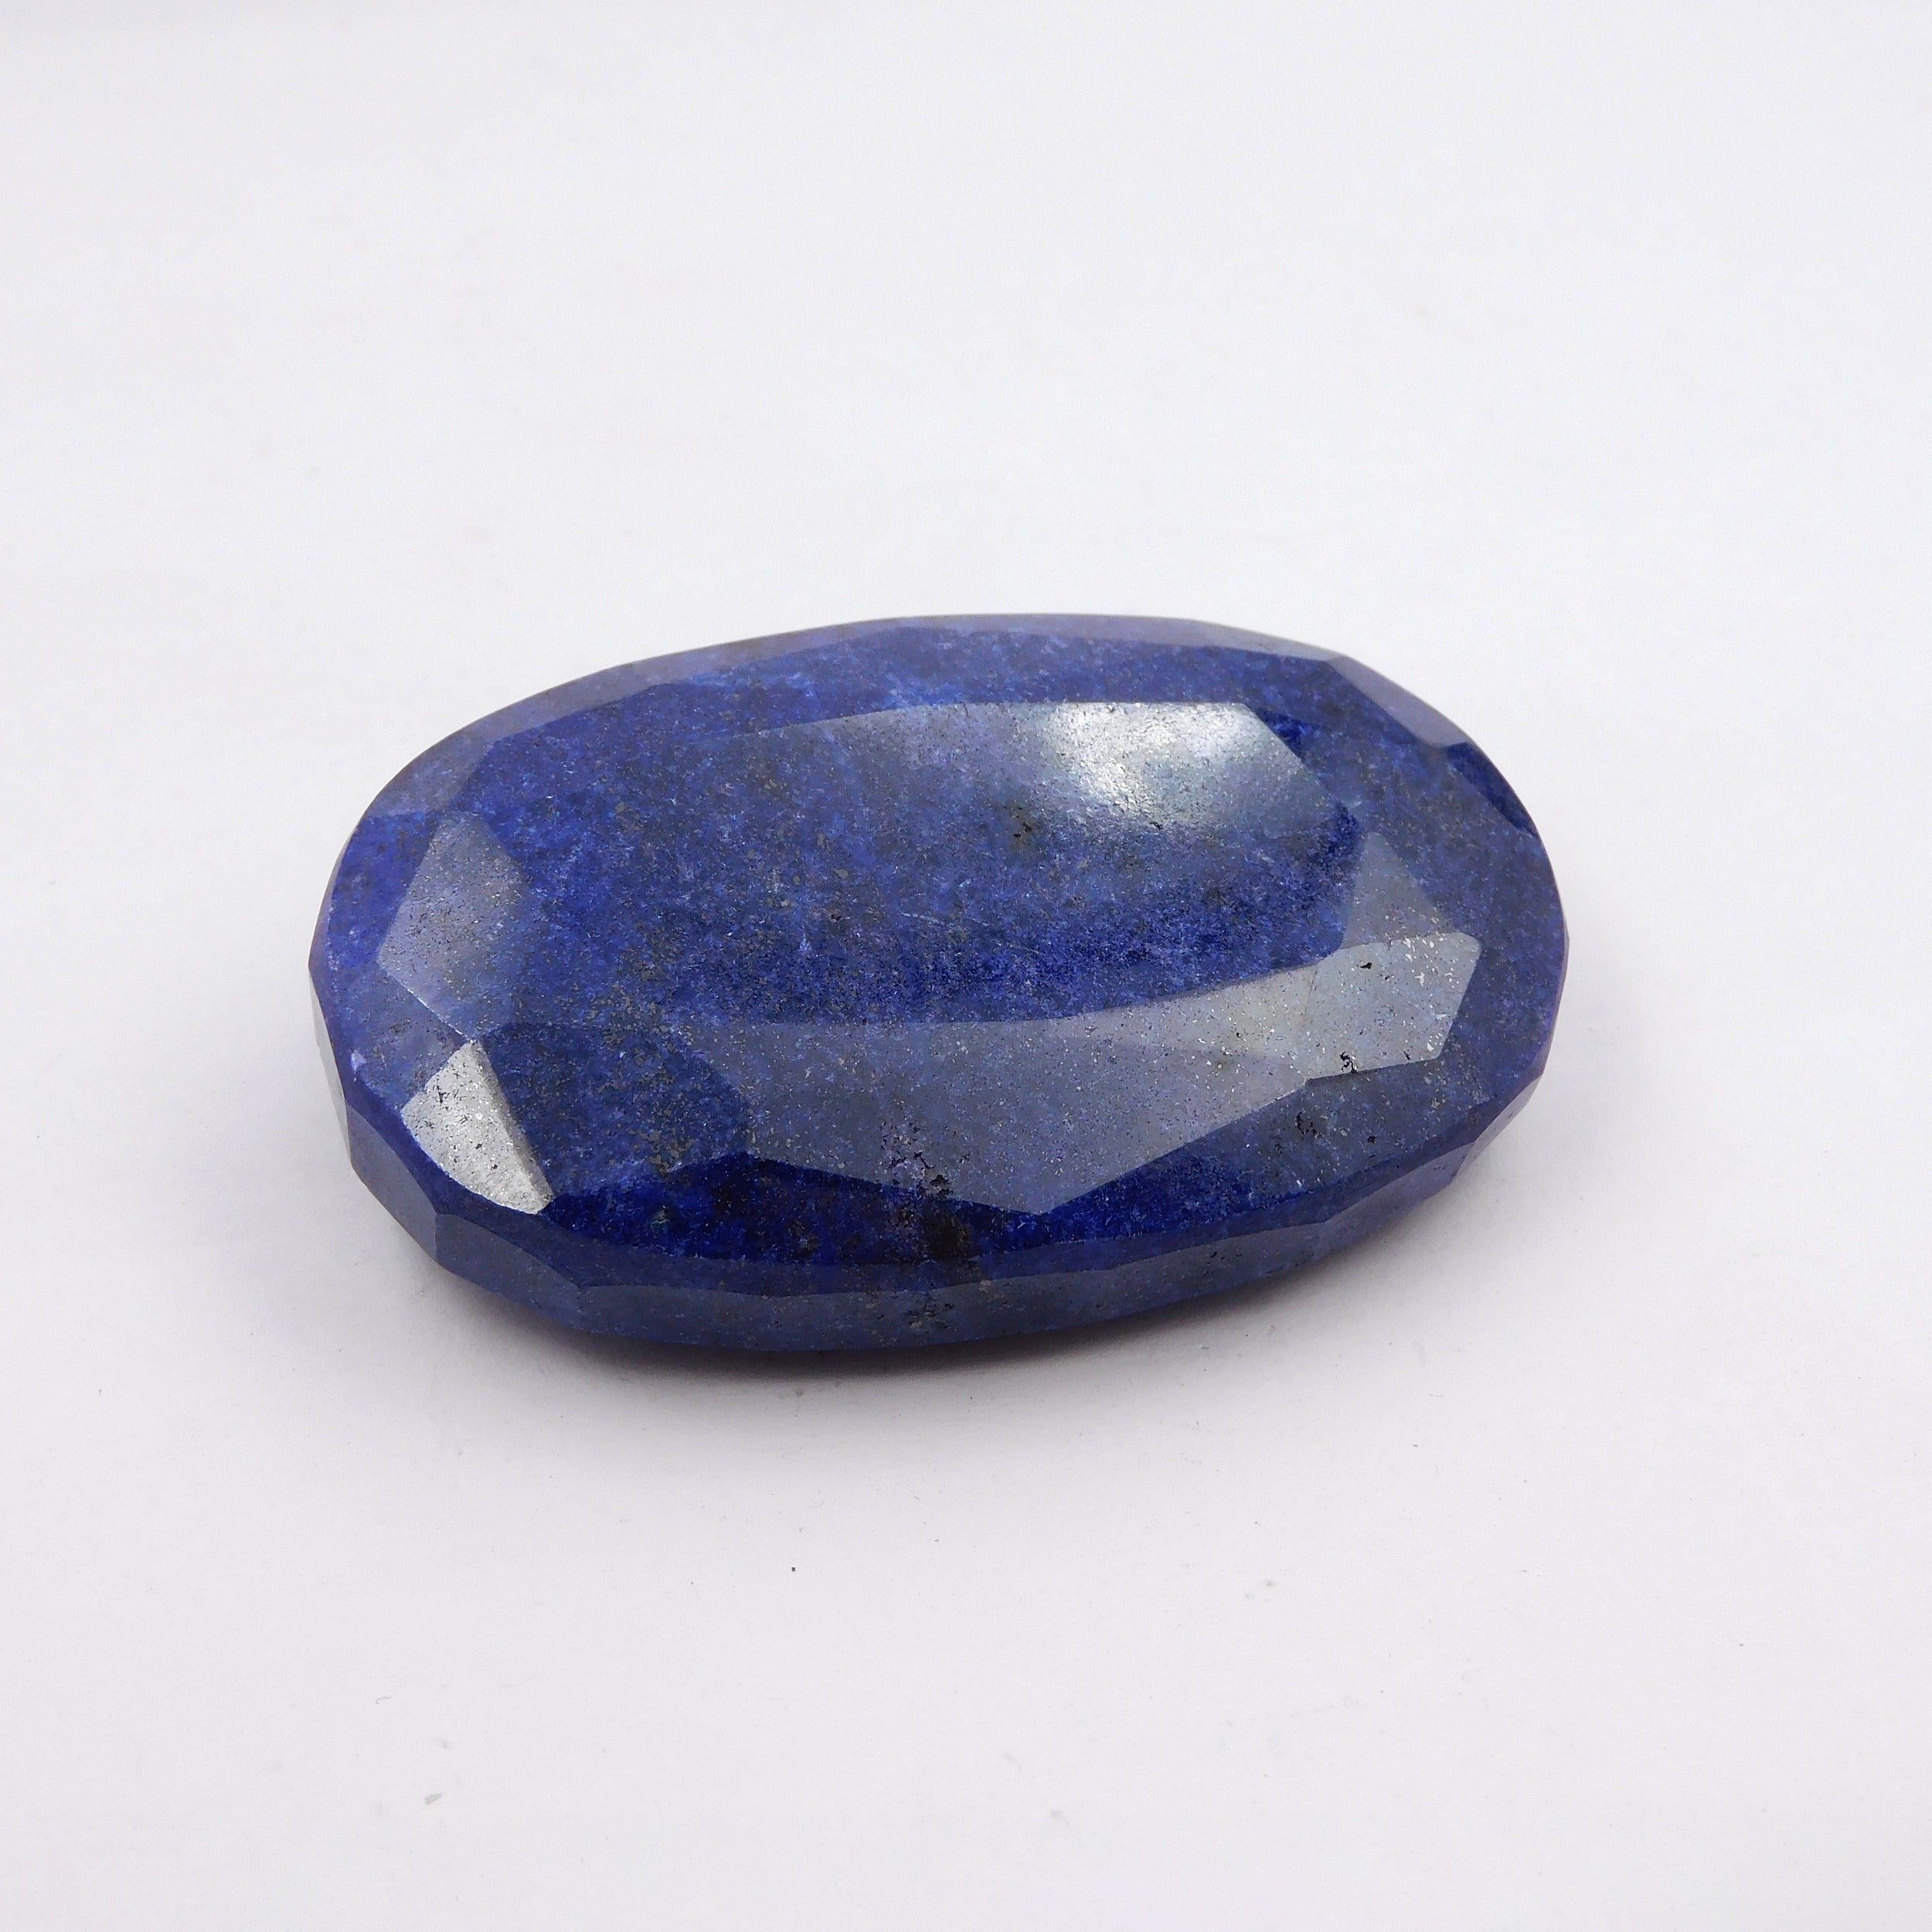 Sapphire Amazing Huge !! 516.05 Carat Certified 100% Natural Blue Sapphire 63x41x16mm Oval Shape From Africa Large Size Loose Gemstone Best For Gift